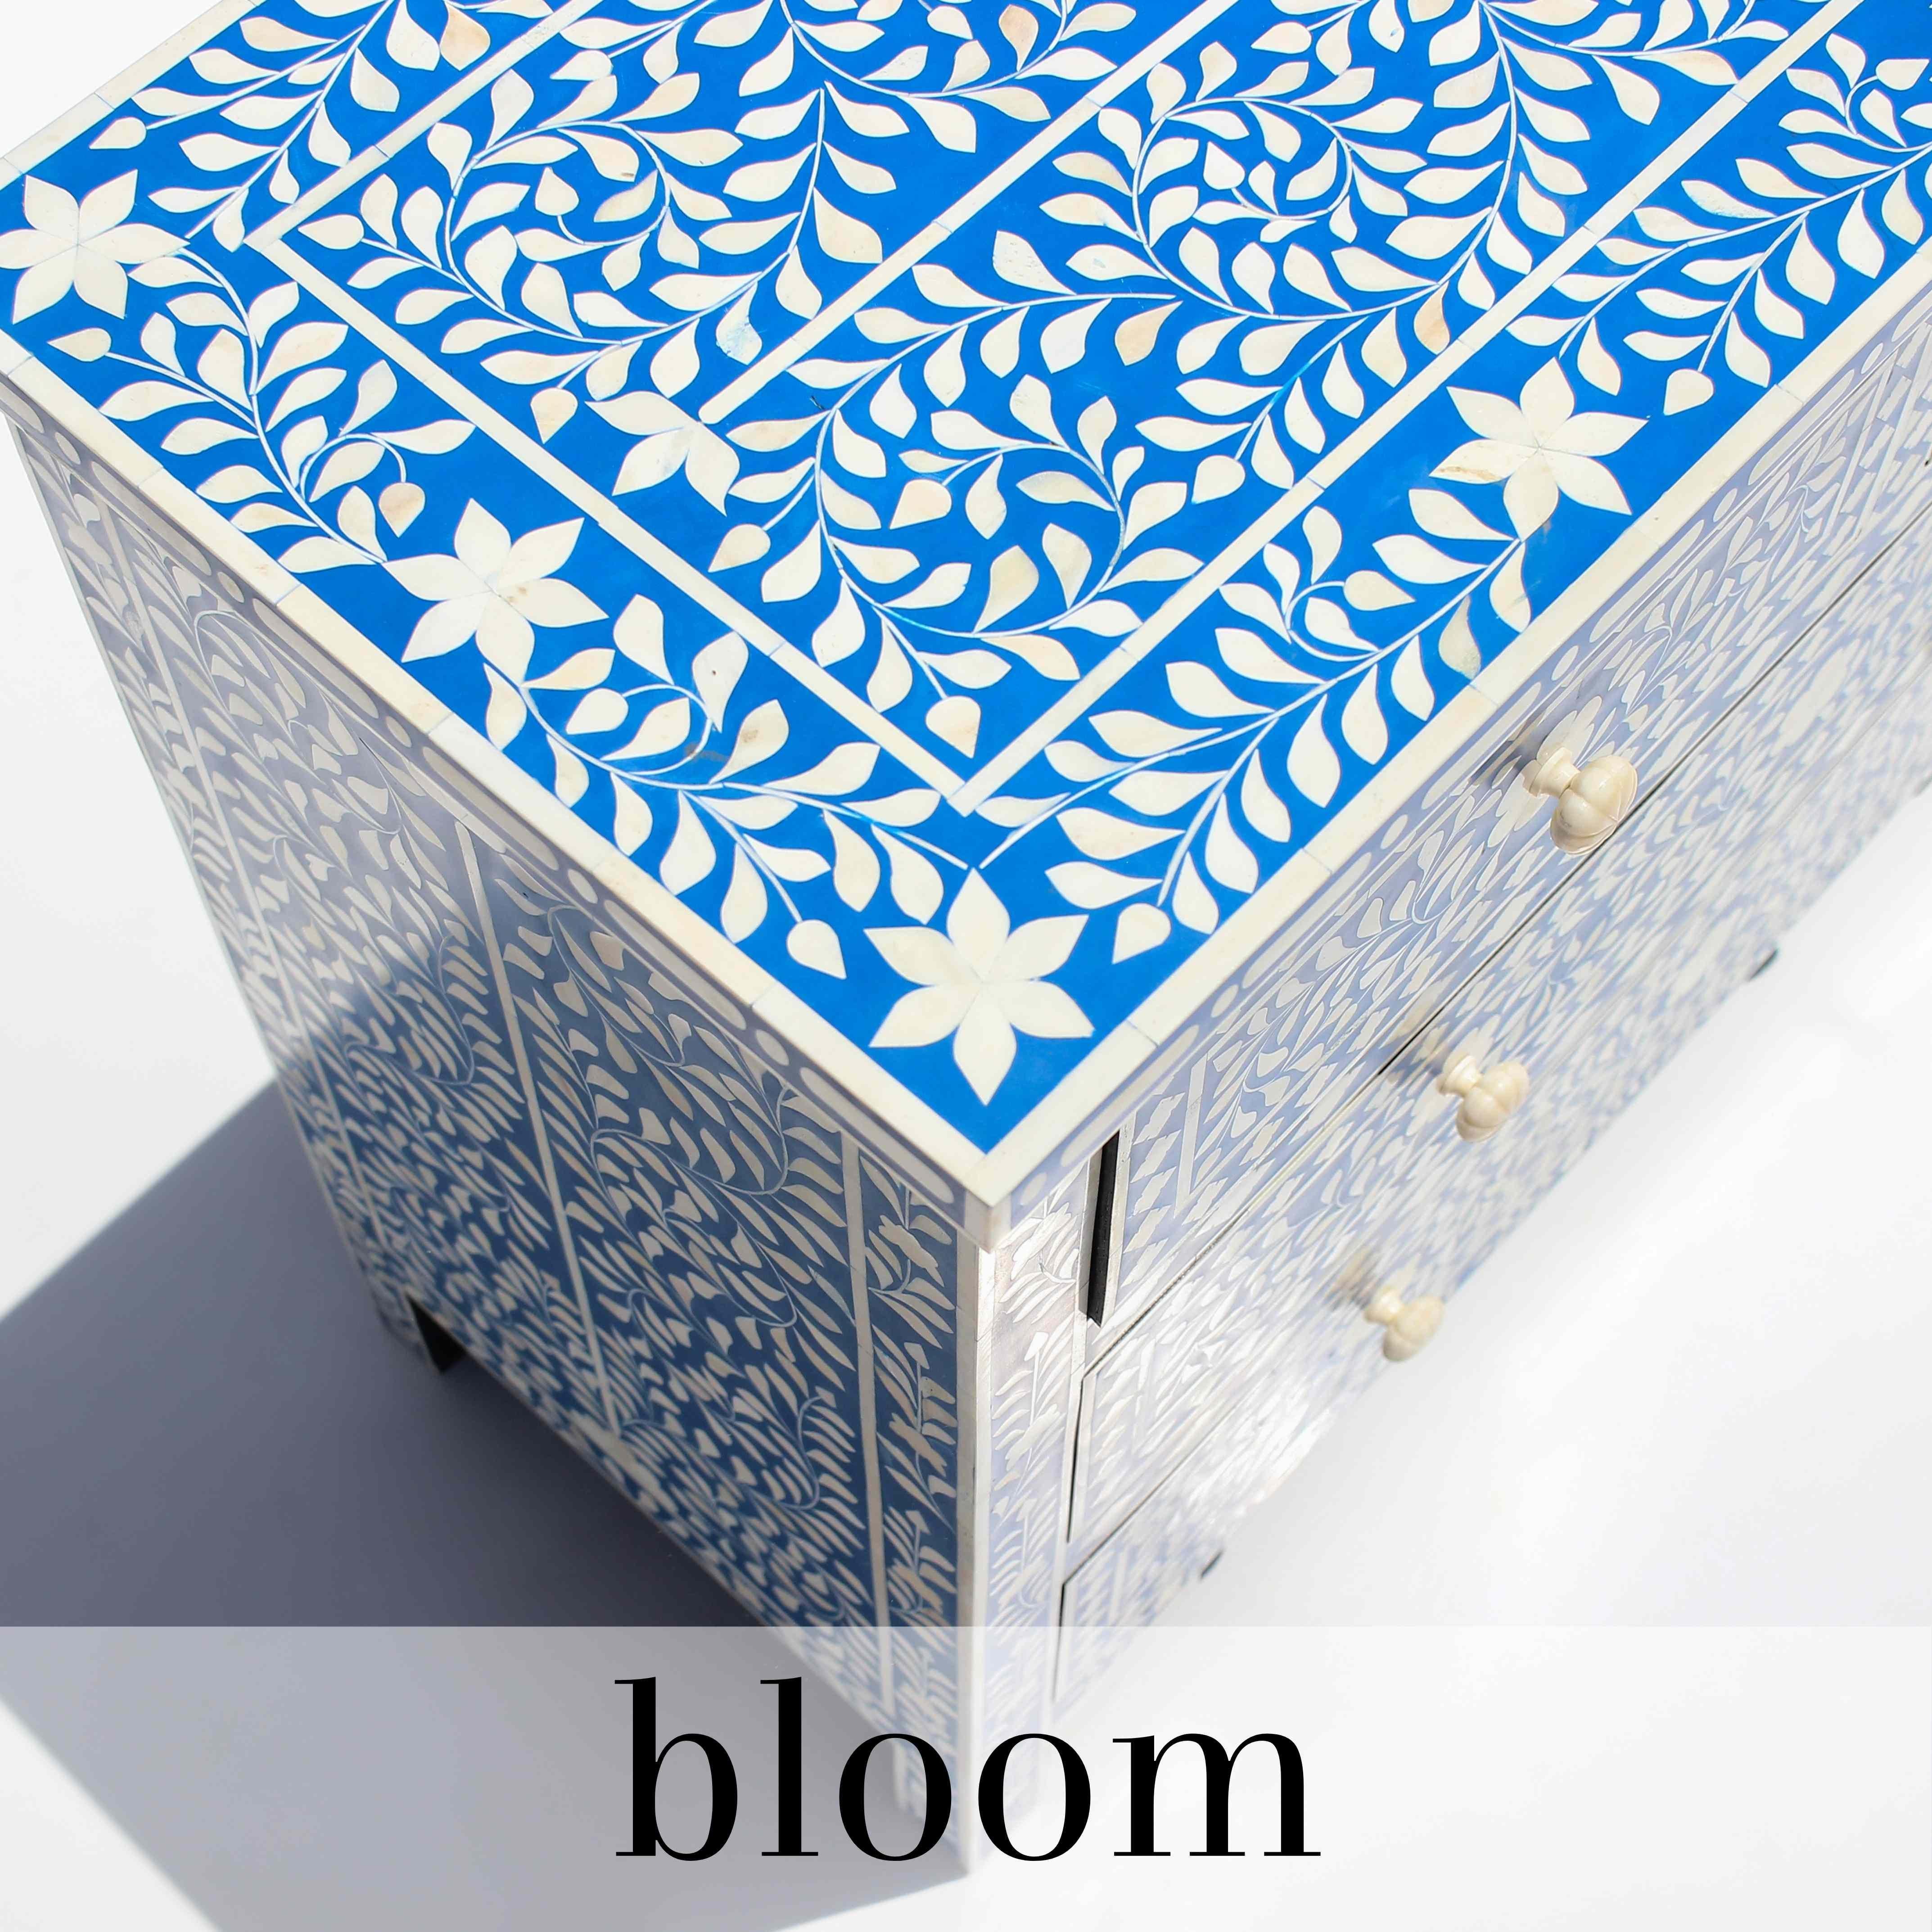 Introducing our Bloom Bright Navy Blue Bone Inlay Dresser, where vibrant hues meet timeless elegance in a symphony of artisanal craftsmanship. Inspired by the melody of dreams, this dresser exudes a sense of free-flowing creativity.

Crafted with